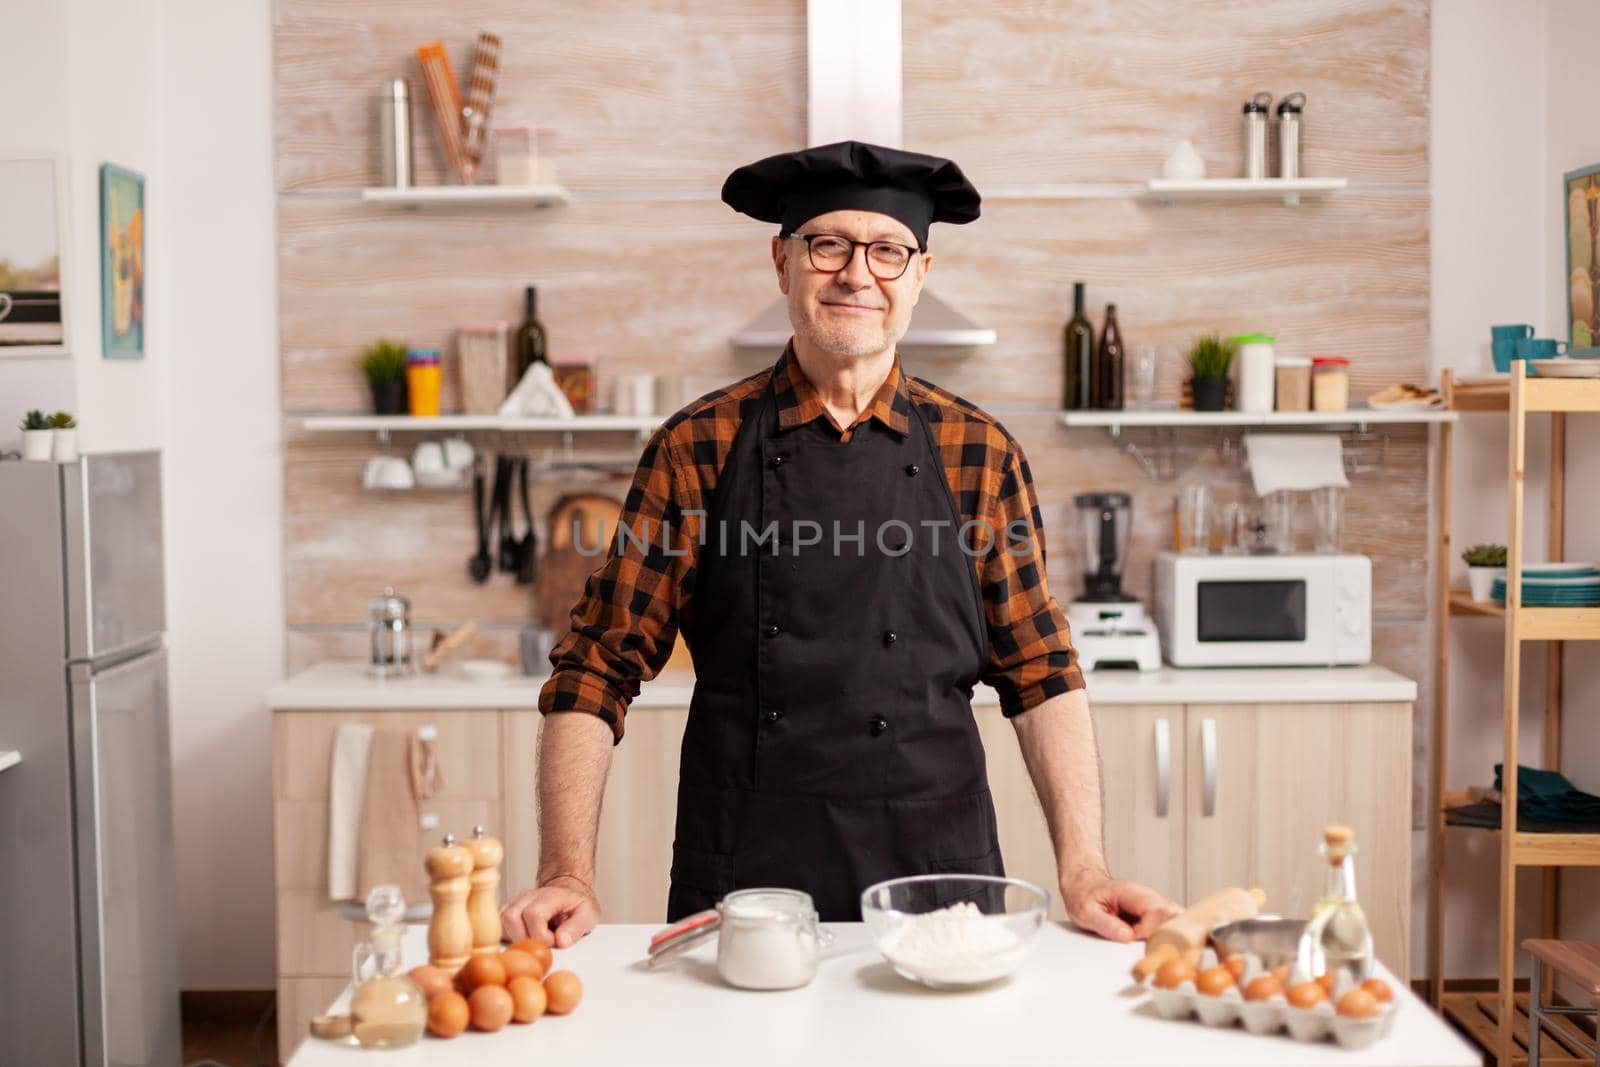 Portrait of chef wearing bonete looking at camera and smiling. Retired elderly baker in kitchen uniform preparing pastry ingredients on wooden table ready to cook homemade tasty bread, cakes and pasta